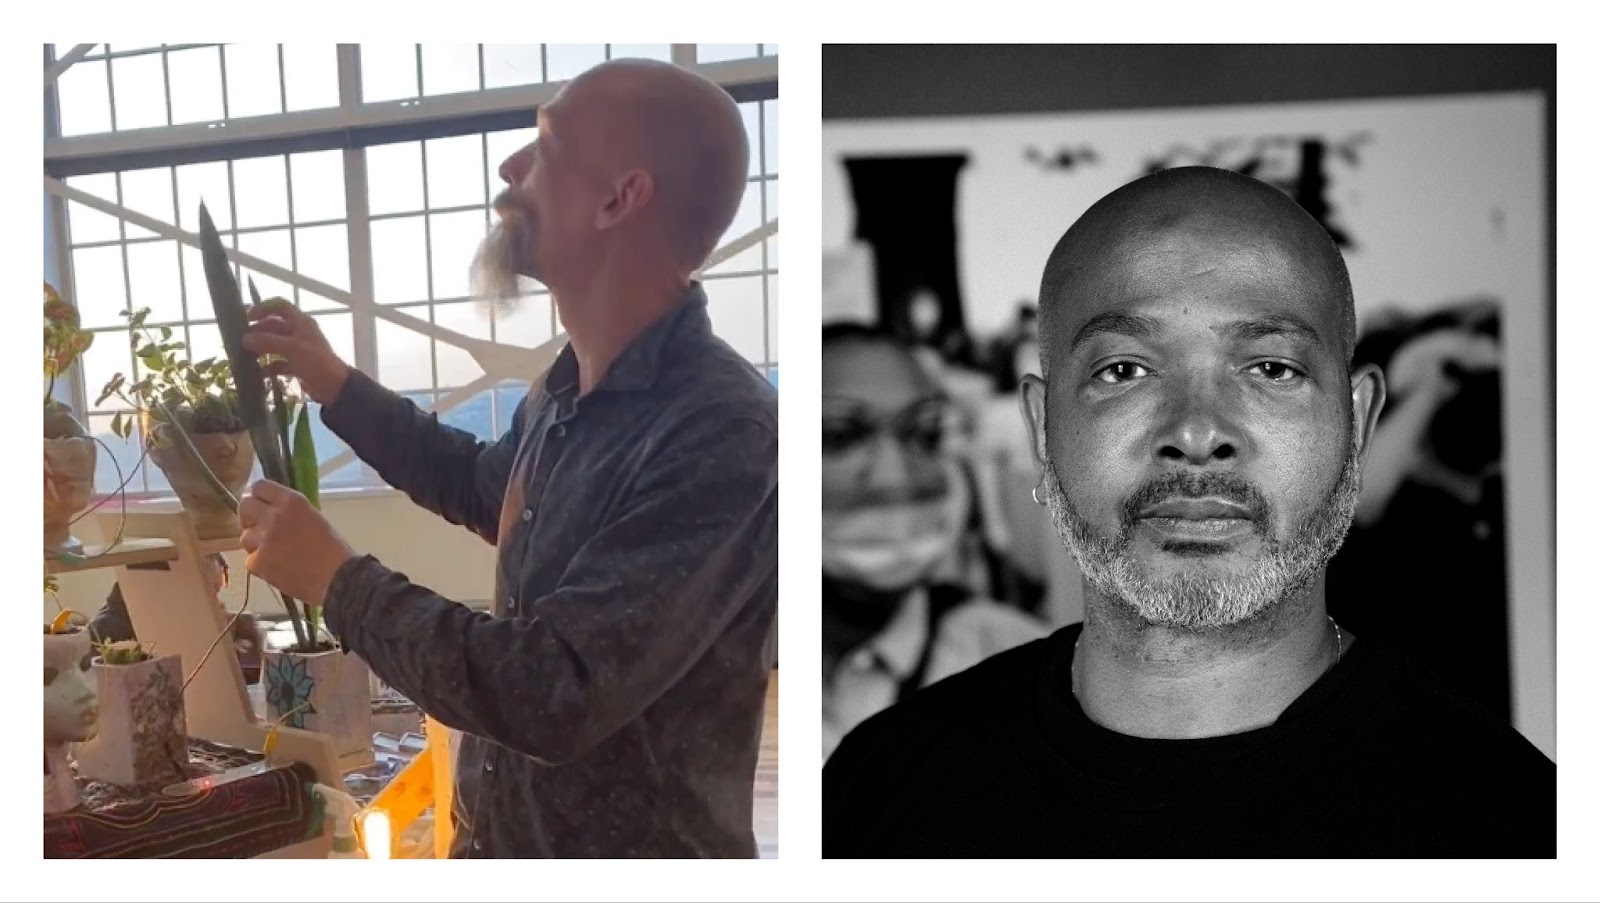 Left, a photo of Josh working with plants in his studio. Right, a headshot of Gregory in black and white.